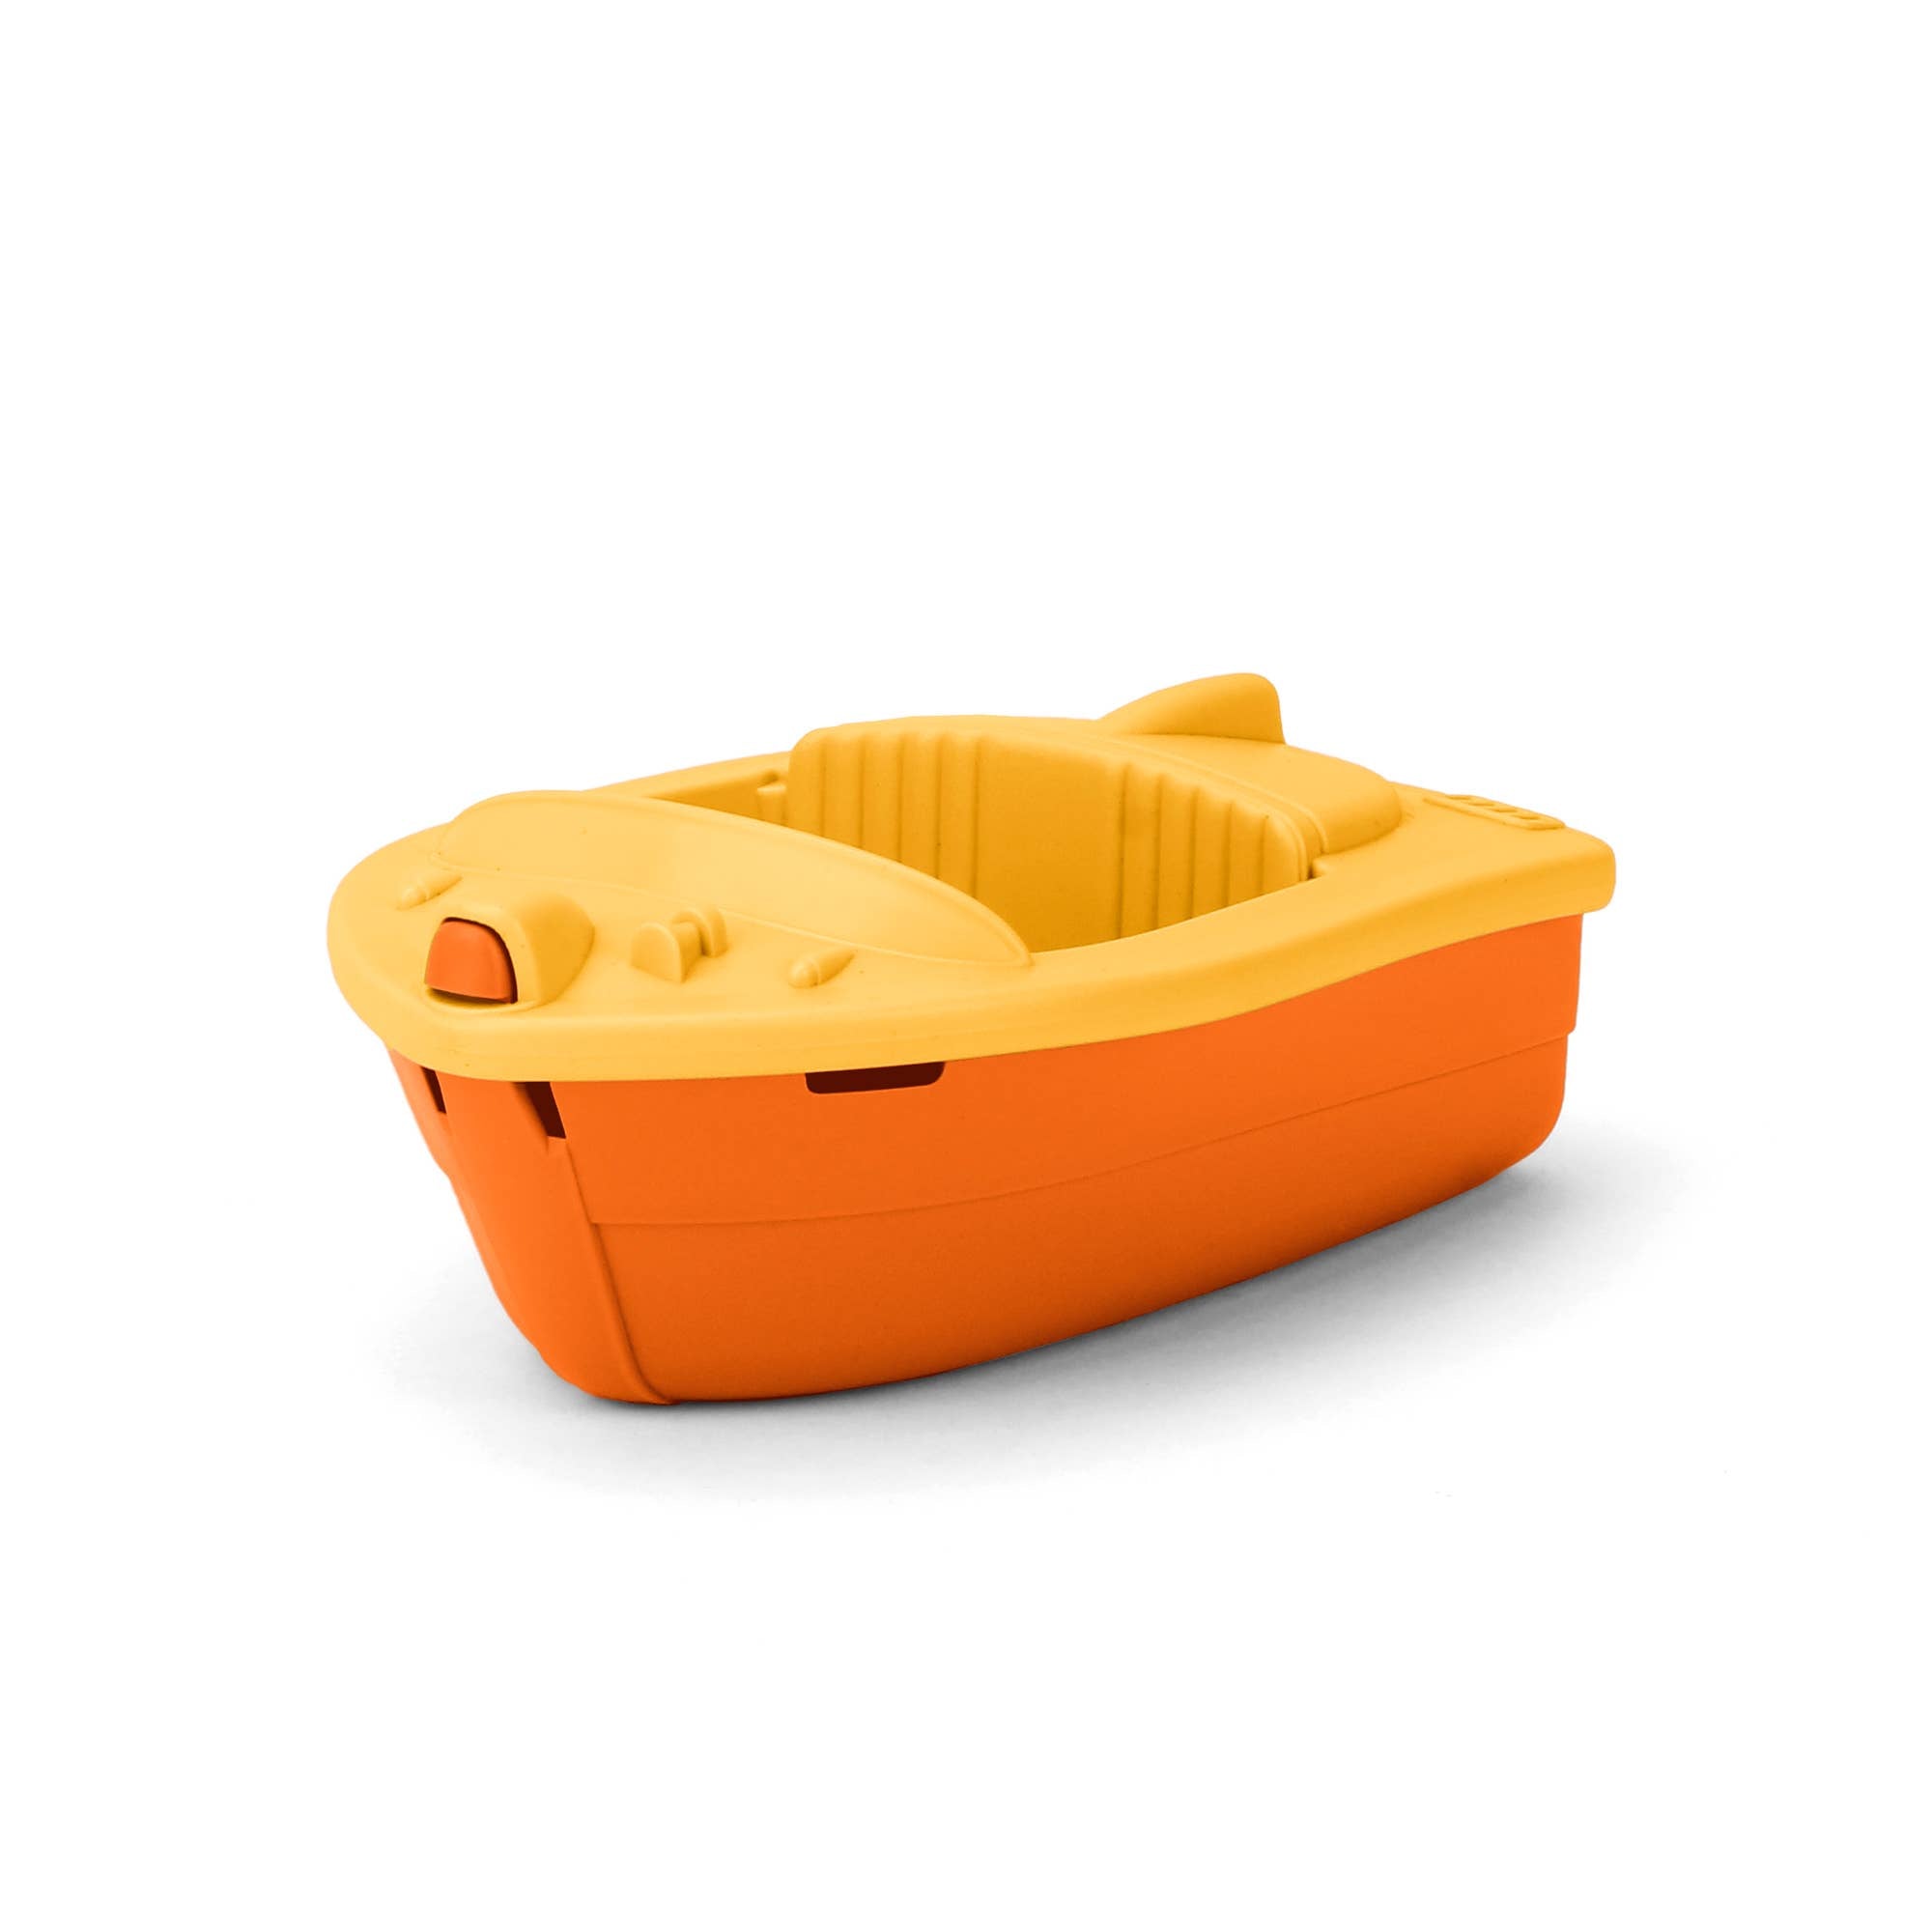 Sport Boat Display Toy